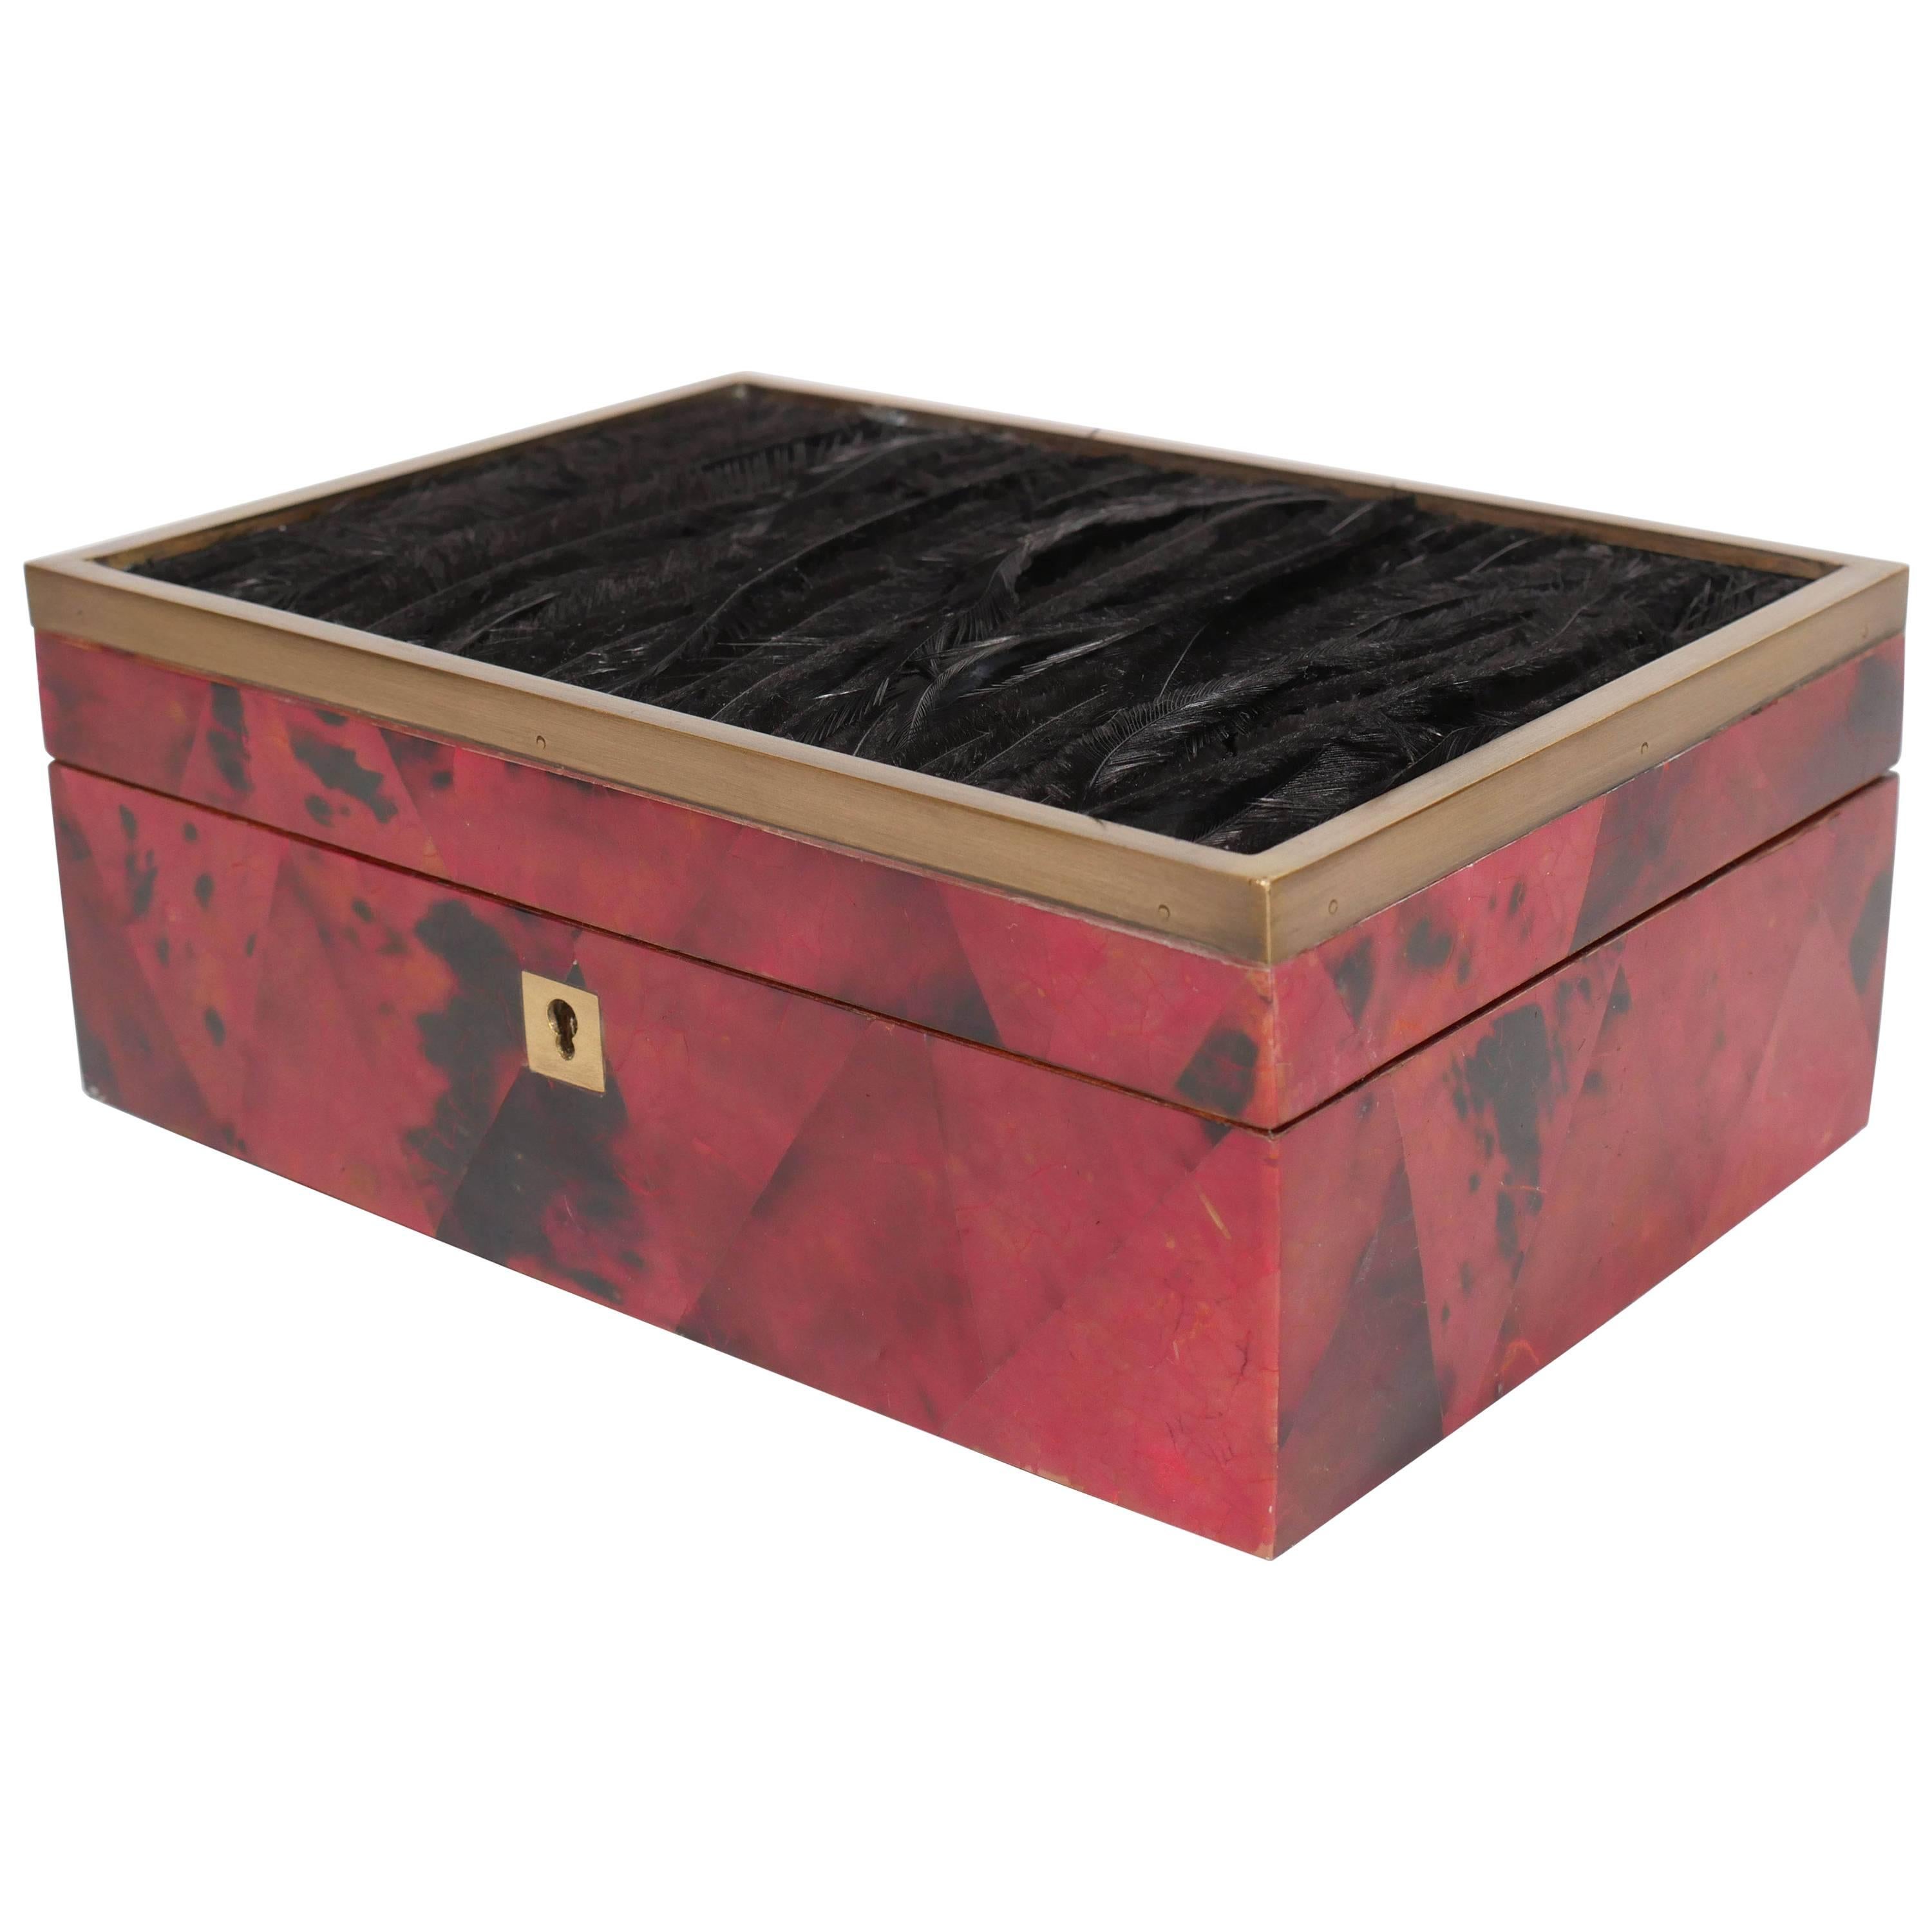 Exceptional Jewelry Box in Lacquered Pen Shell with Exotic Feather Accents